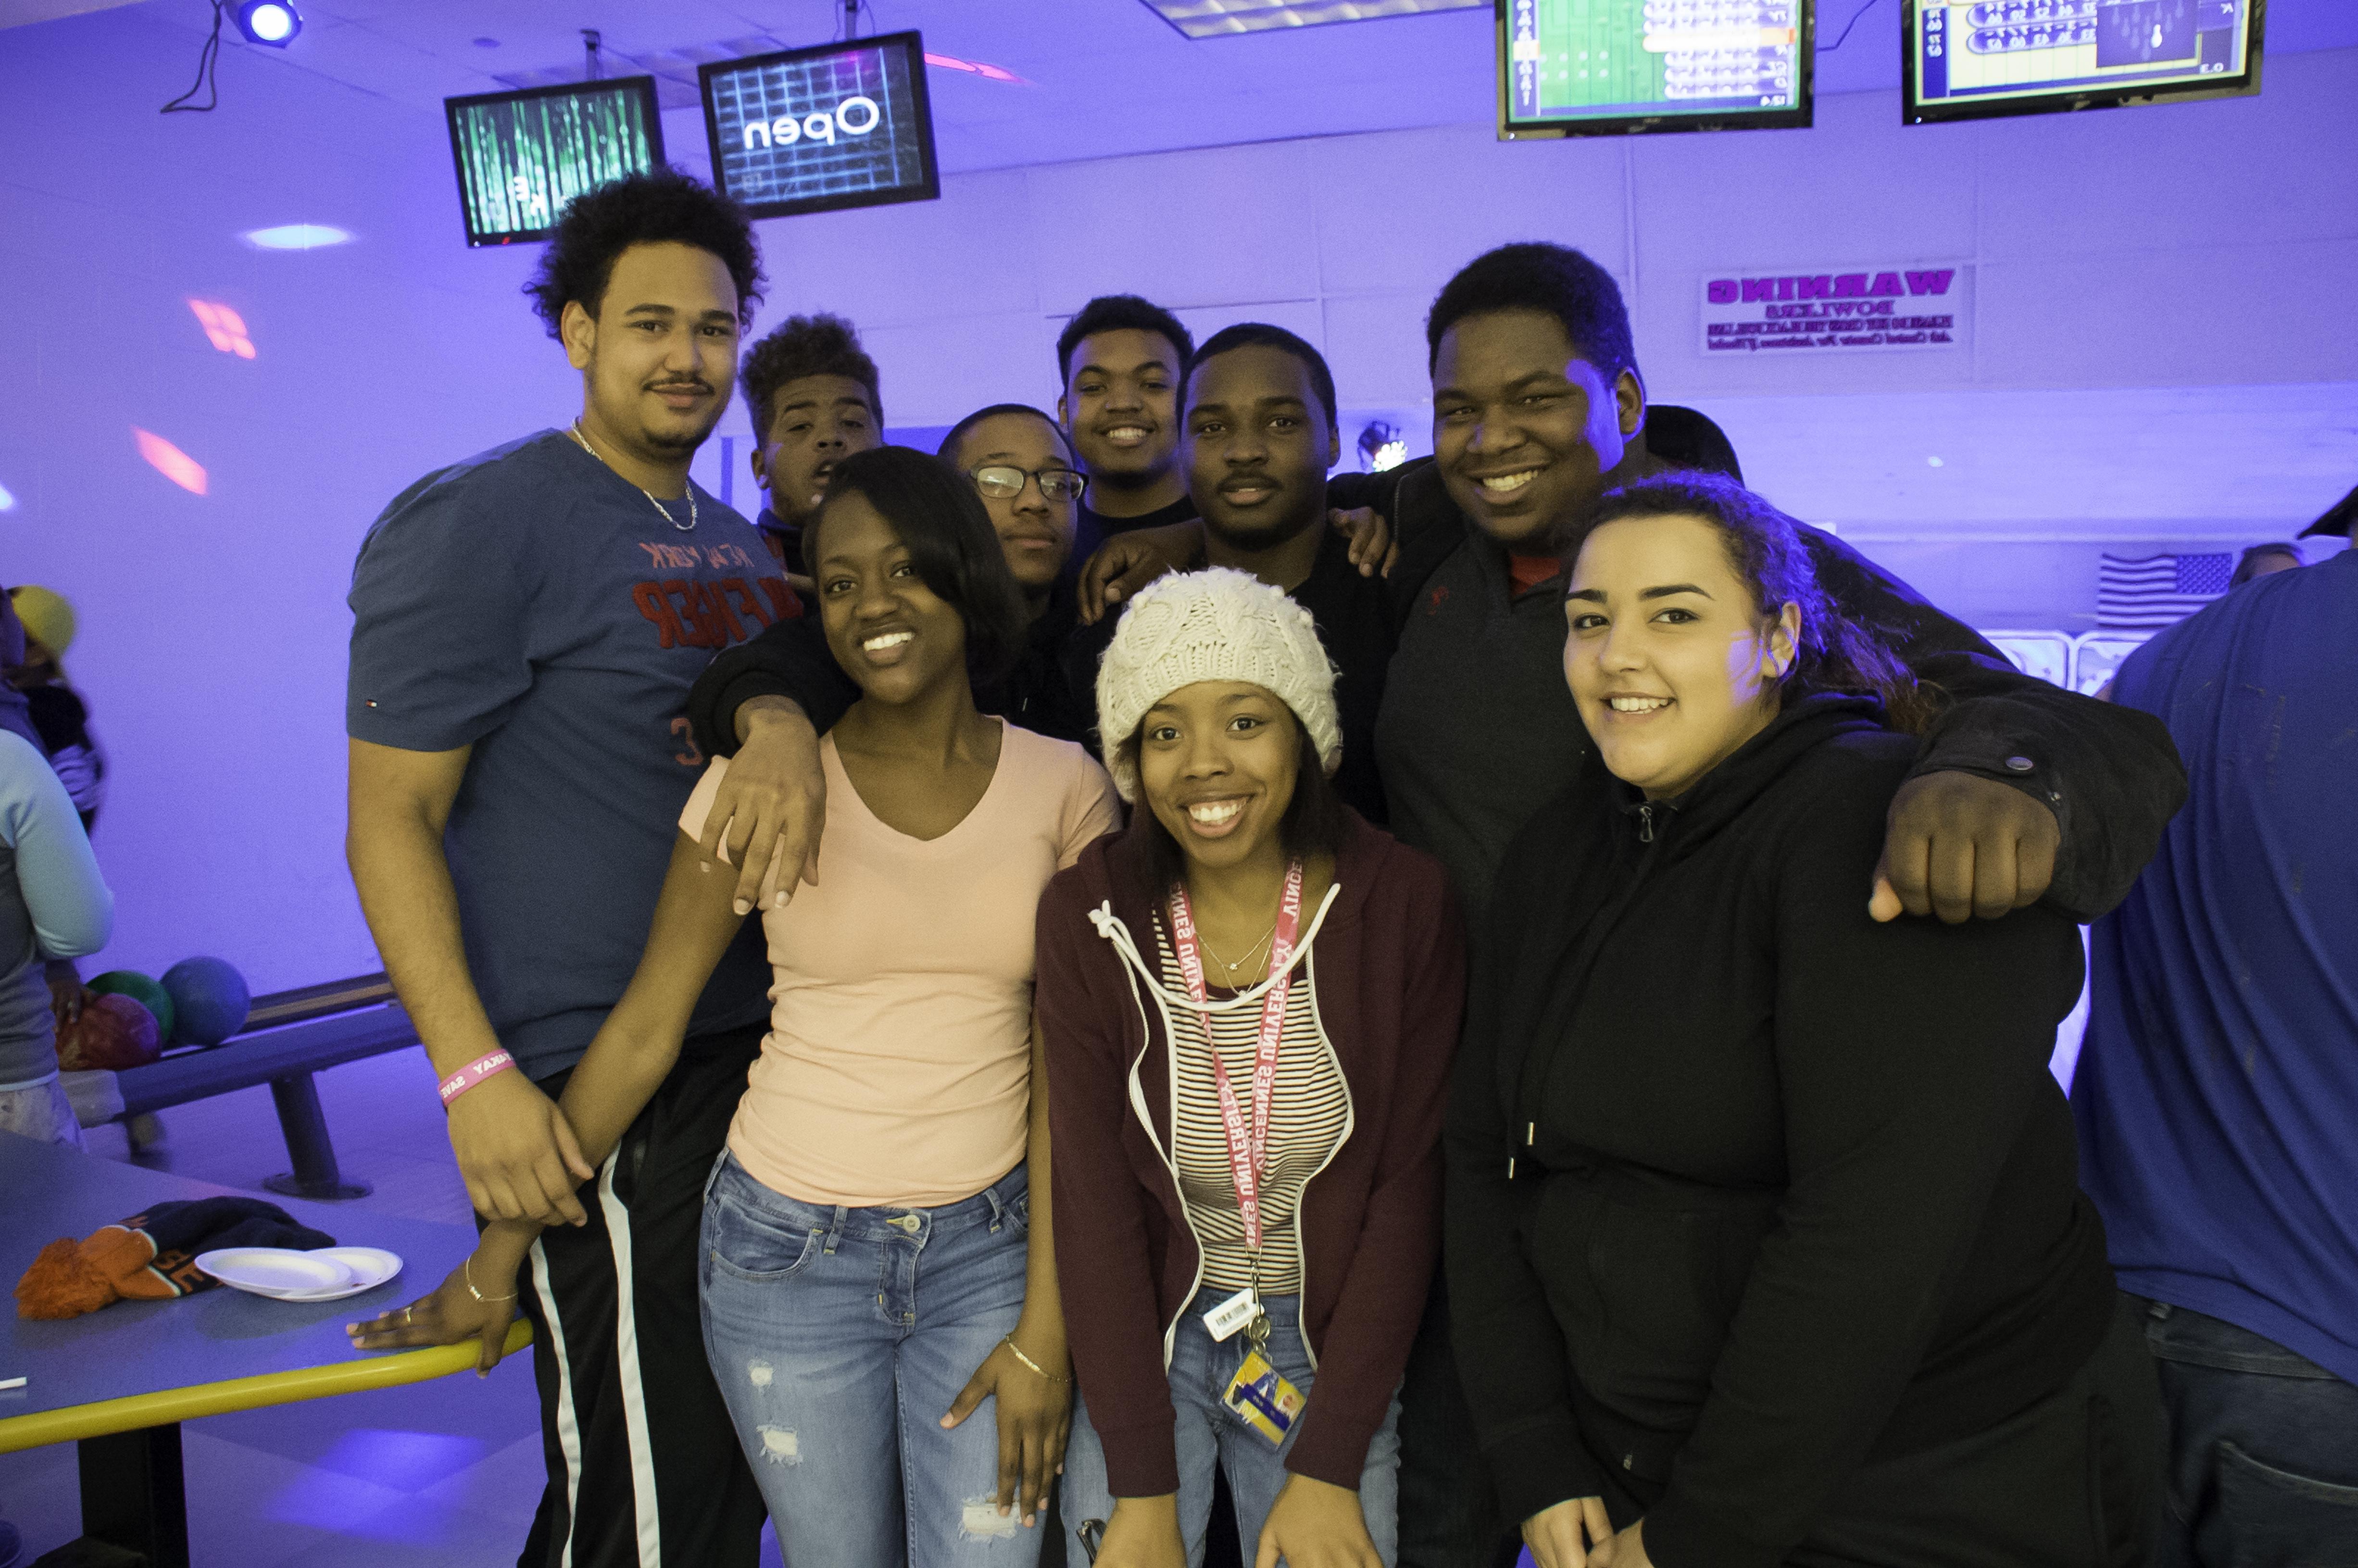 A group of students posing for a photo at the bowling alley